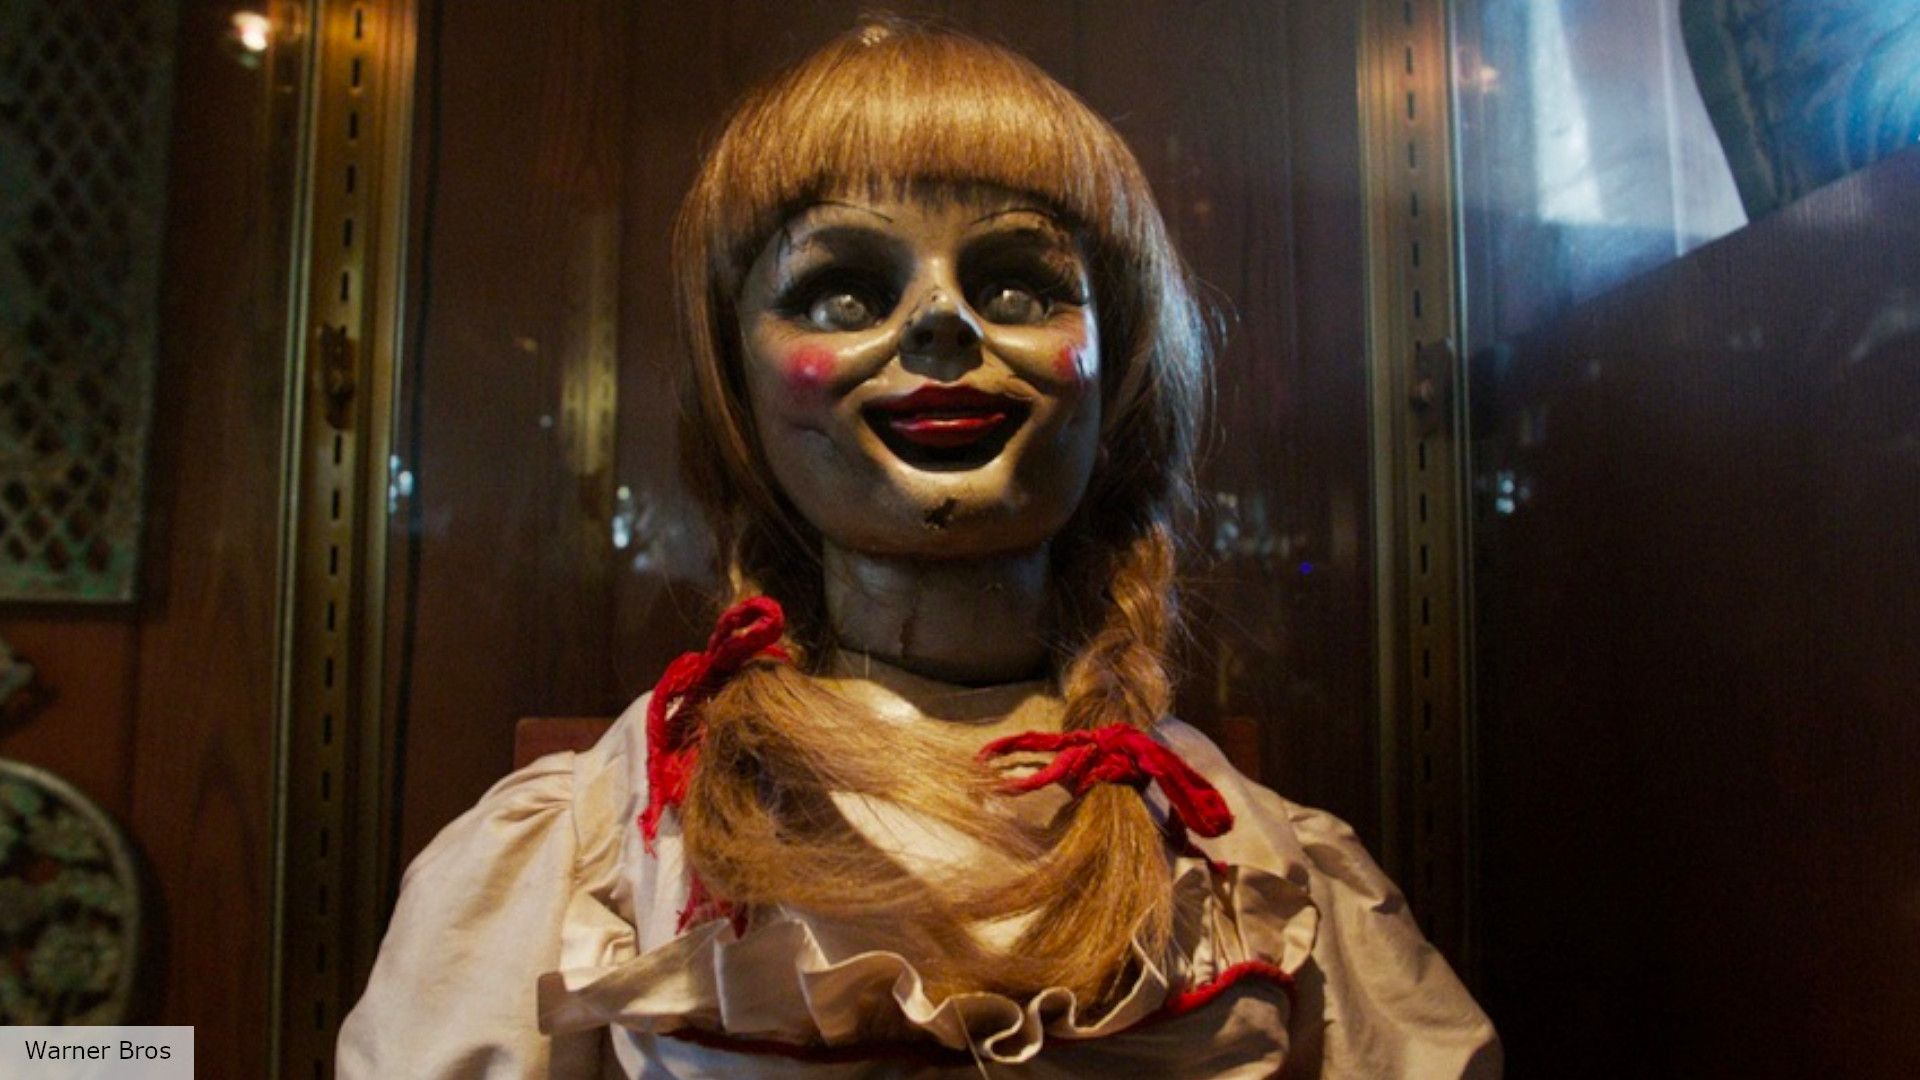 The Conjuring: Annabelle in the Conjuring movies behind her glass case box